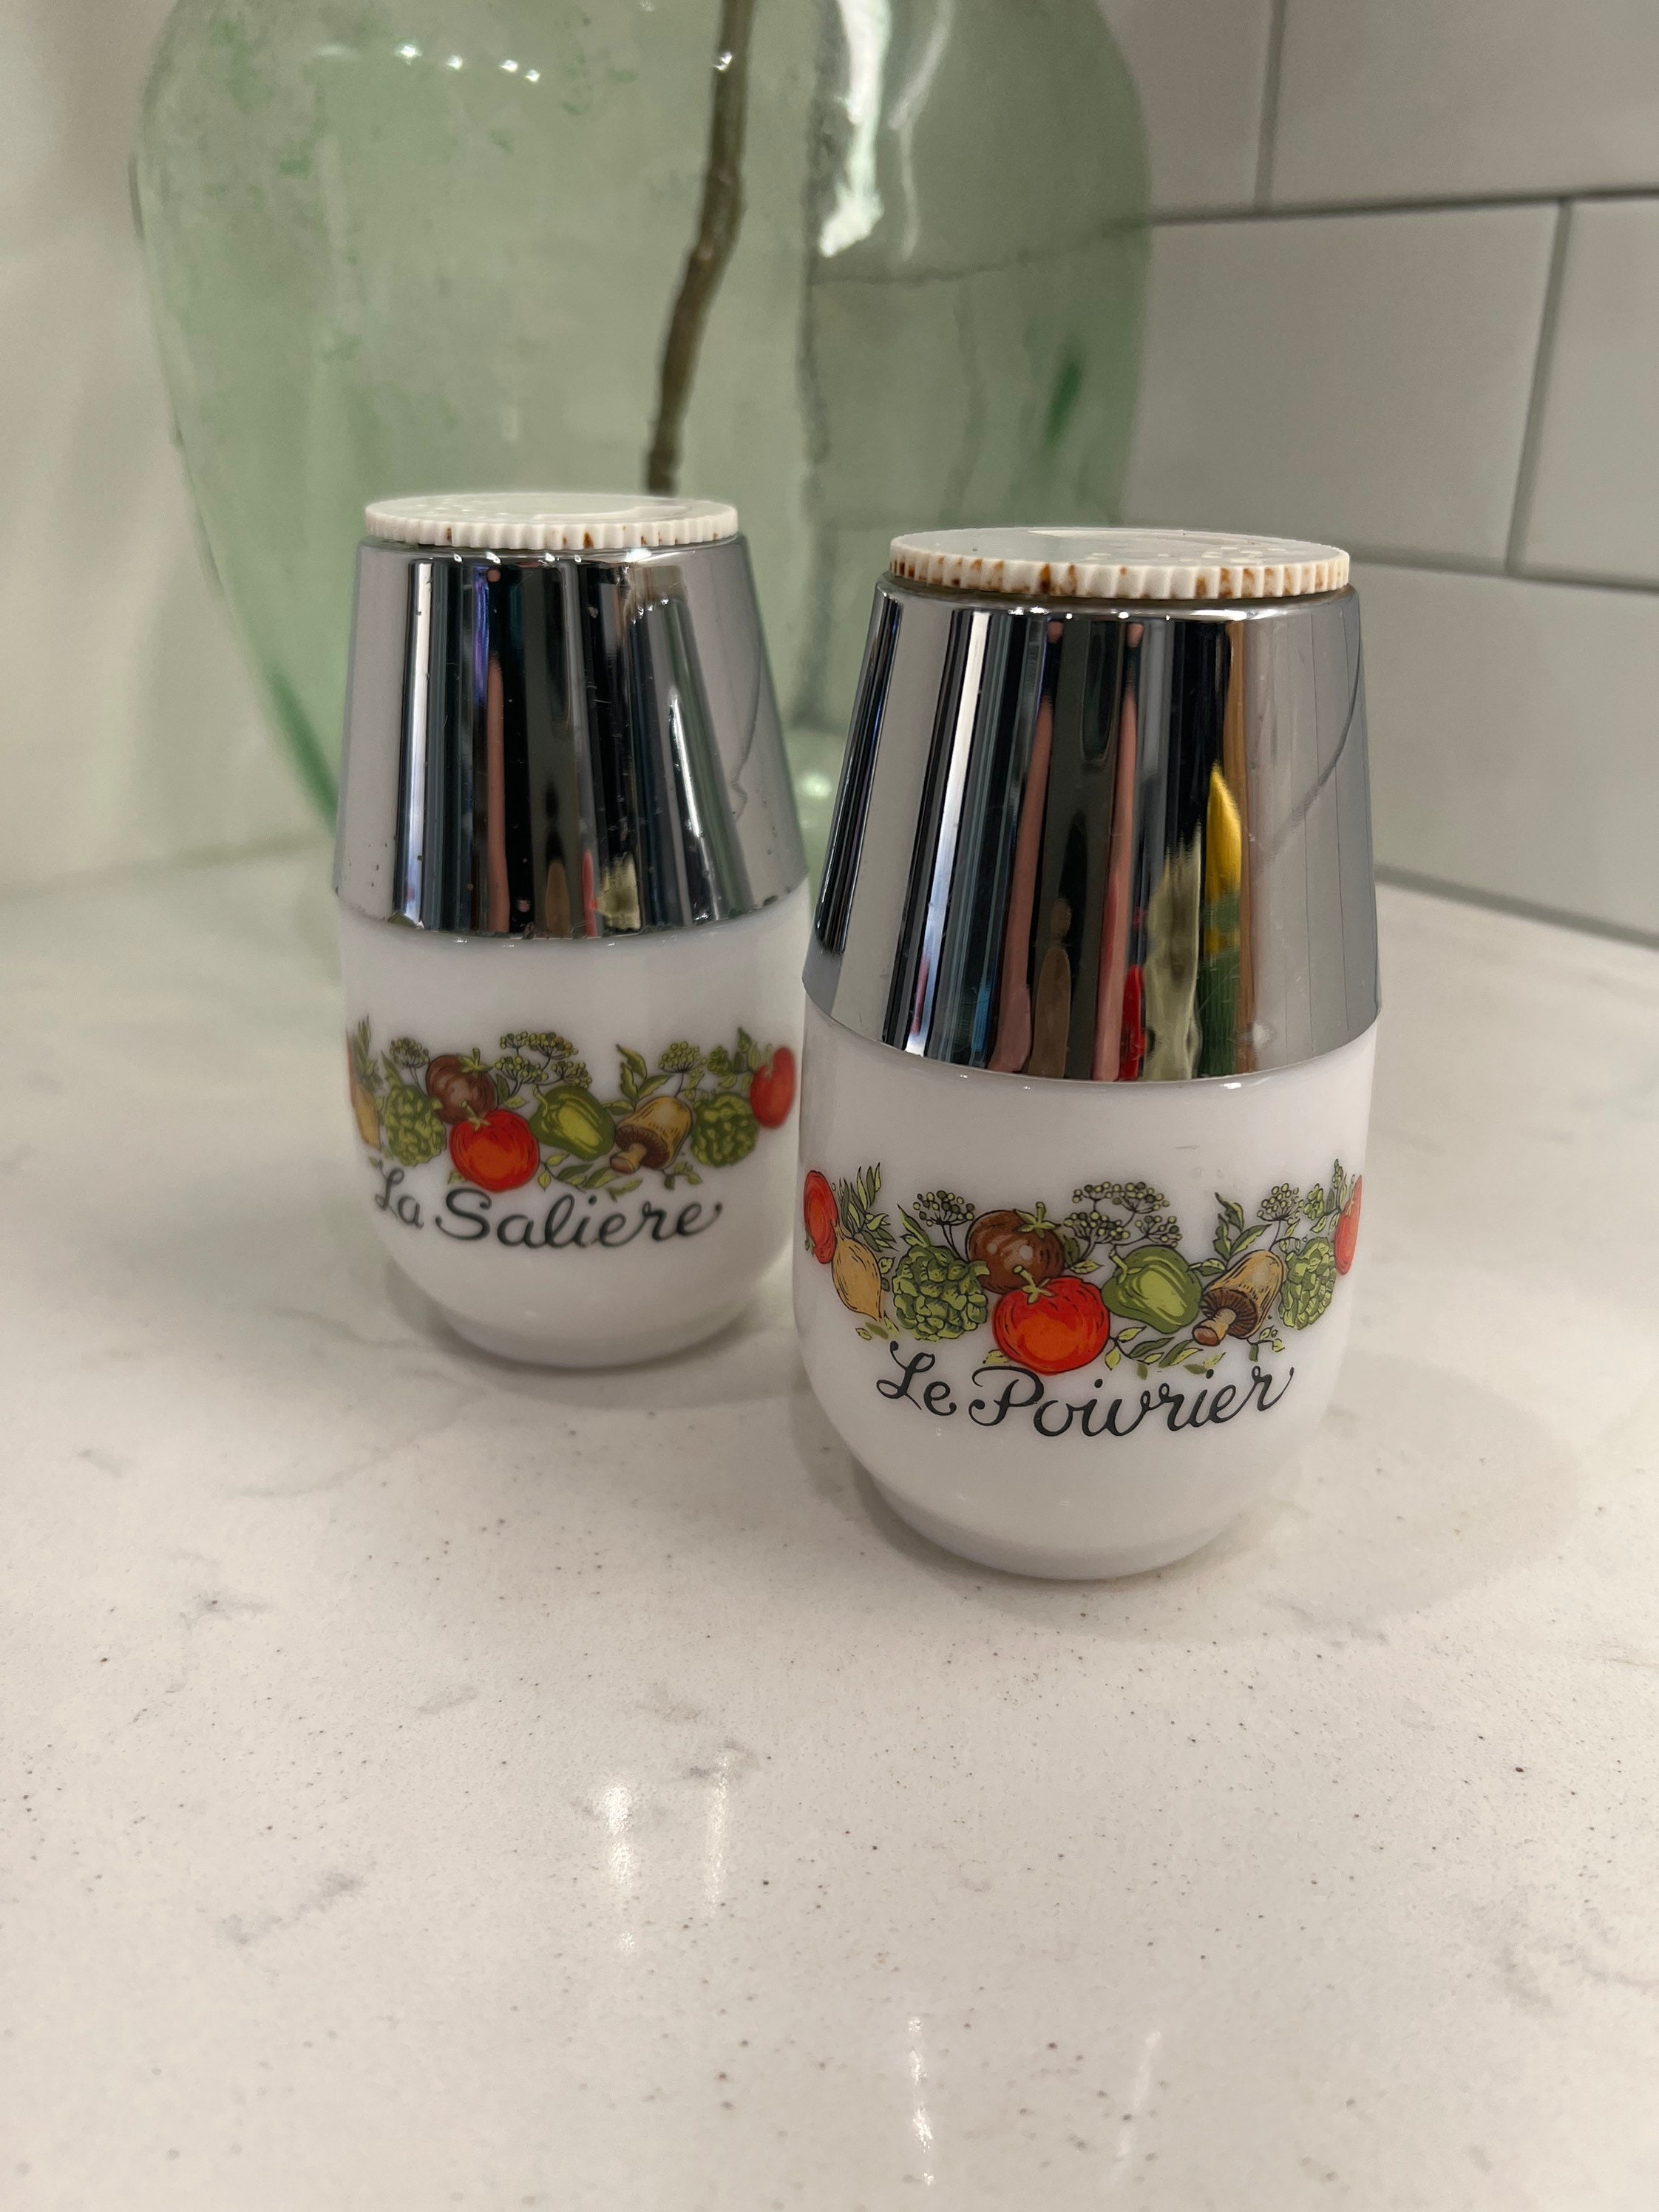 Gemco Corning Salt and Pepper Shakers Spice of Life La Saliere and Le  Poivrier, Vintage Gemco 